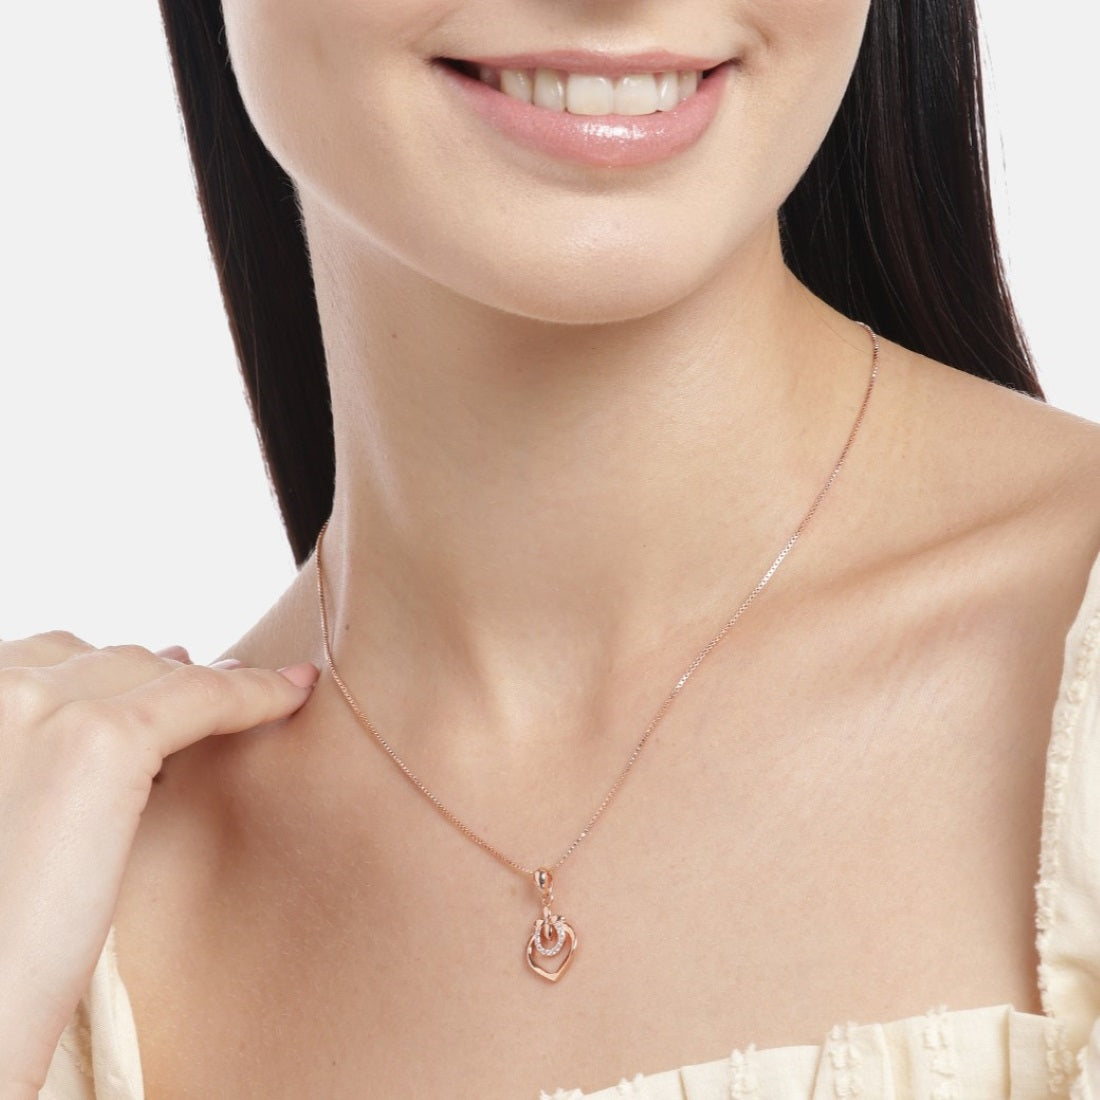 Hearty Radiant Rose Gold-Plated 925 Sterling Silver Pendant with Chain